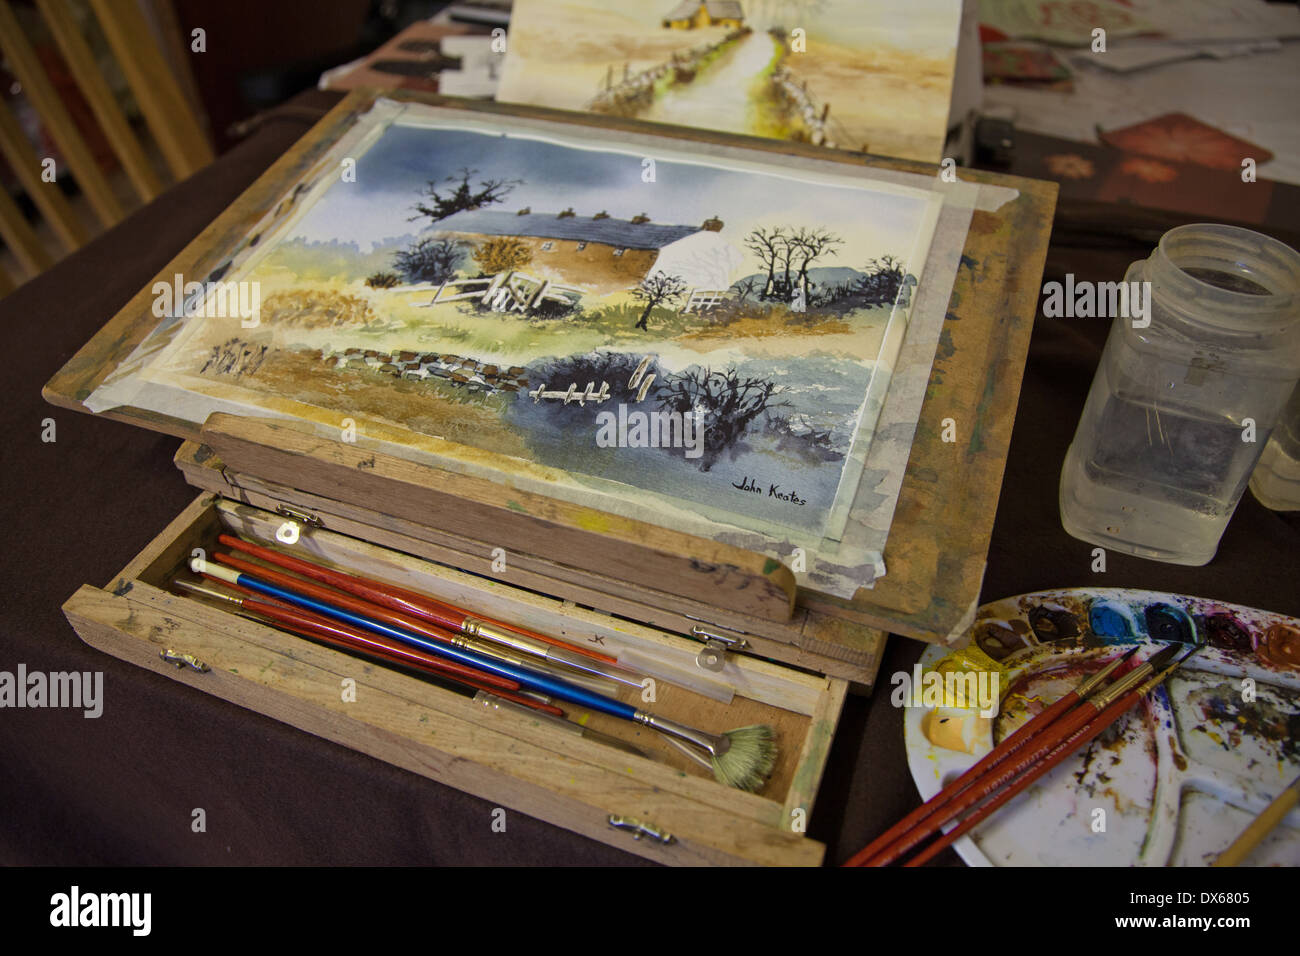 A watercolour painting on a table easel with a palette brushes and water containers Stock Photo